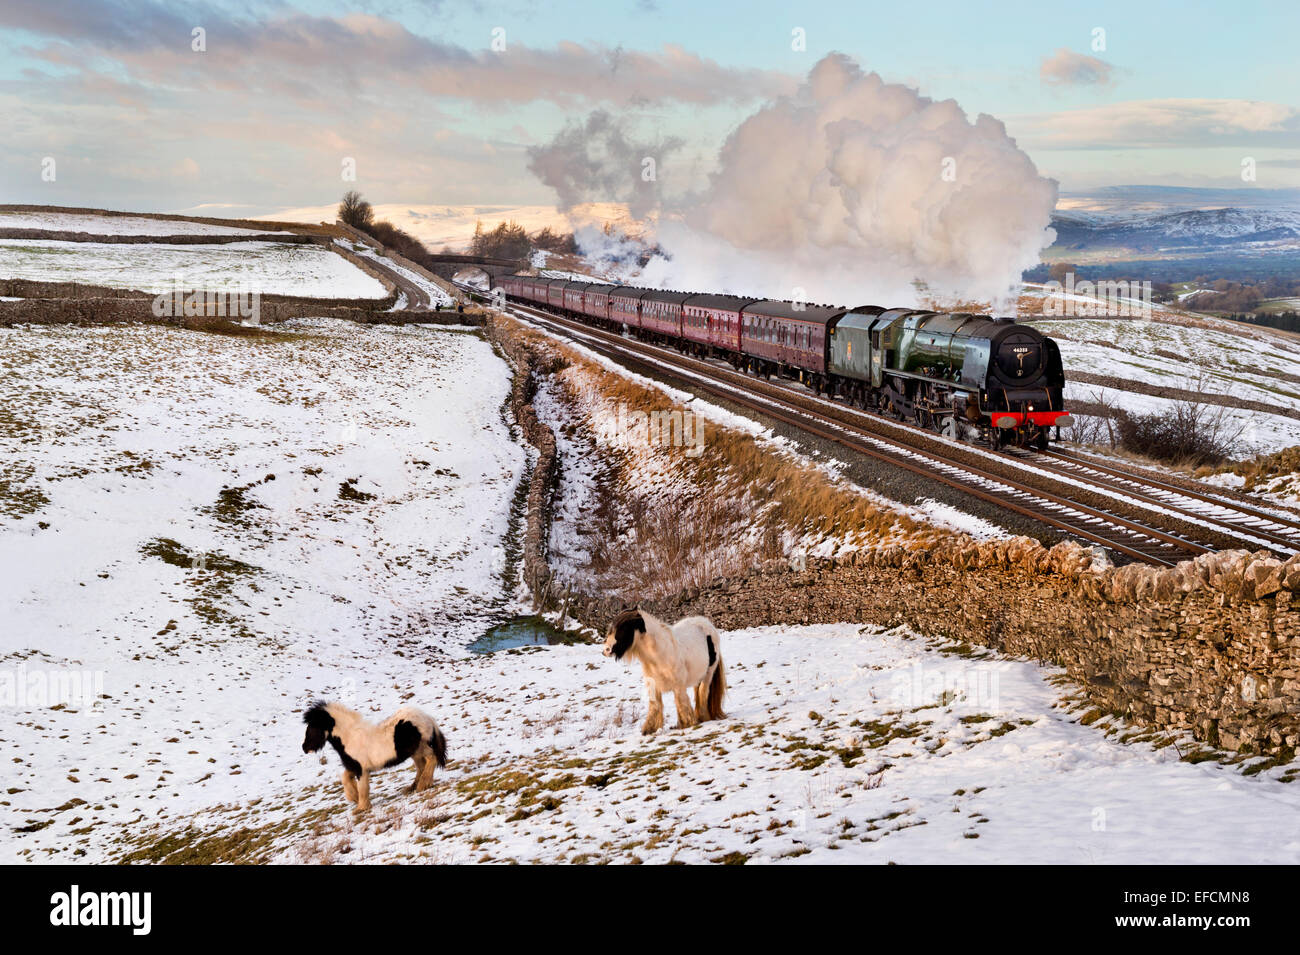 Kirkby Stephen, Cumbria, UK. 31st Jan, 2015. The Duchess of Sutherland steam locomotive pulls a special Winter Cumbian Mountain Express over a snowy landscape, heading south from Carlisle Stock Photo